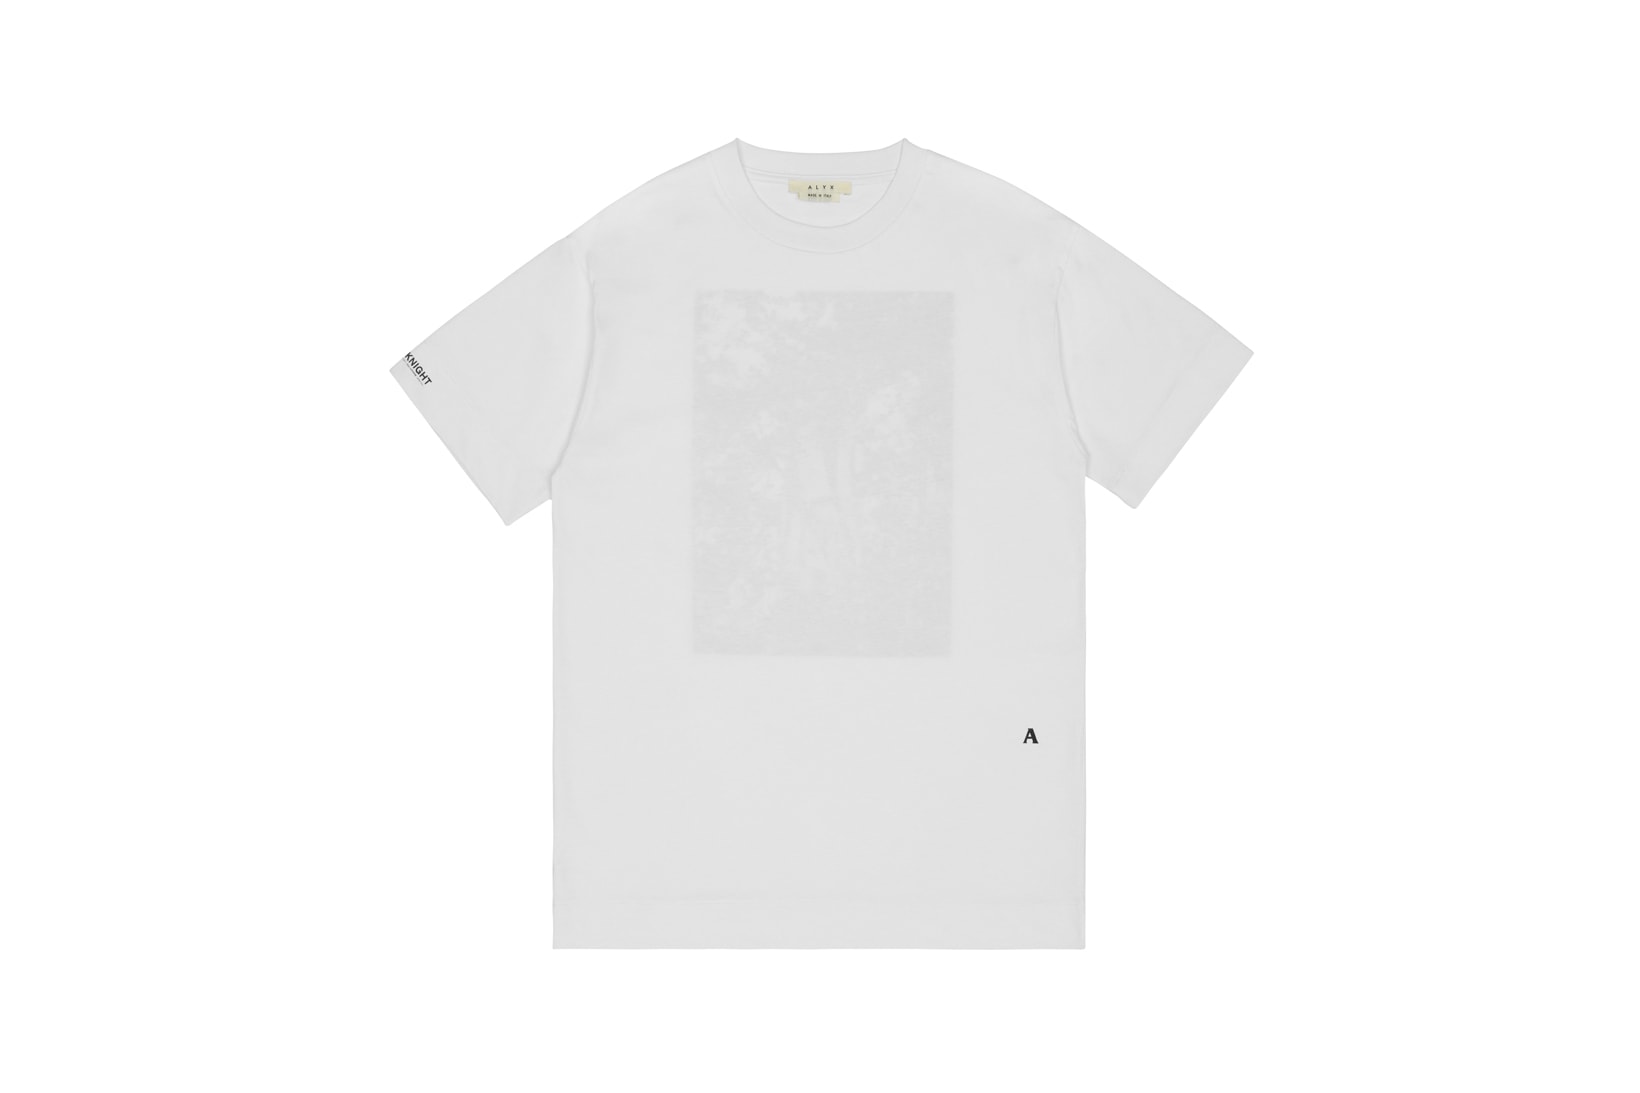 1017 ALYX 9SM x SHOWstudio Capsule Collection Stella Short Sleeve Tee White